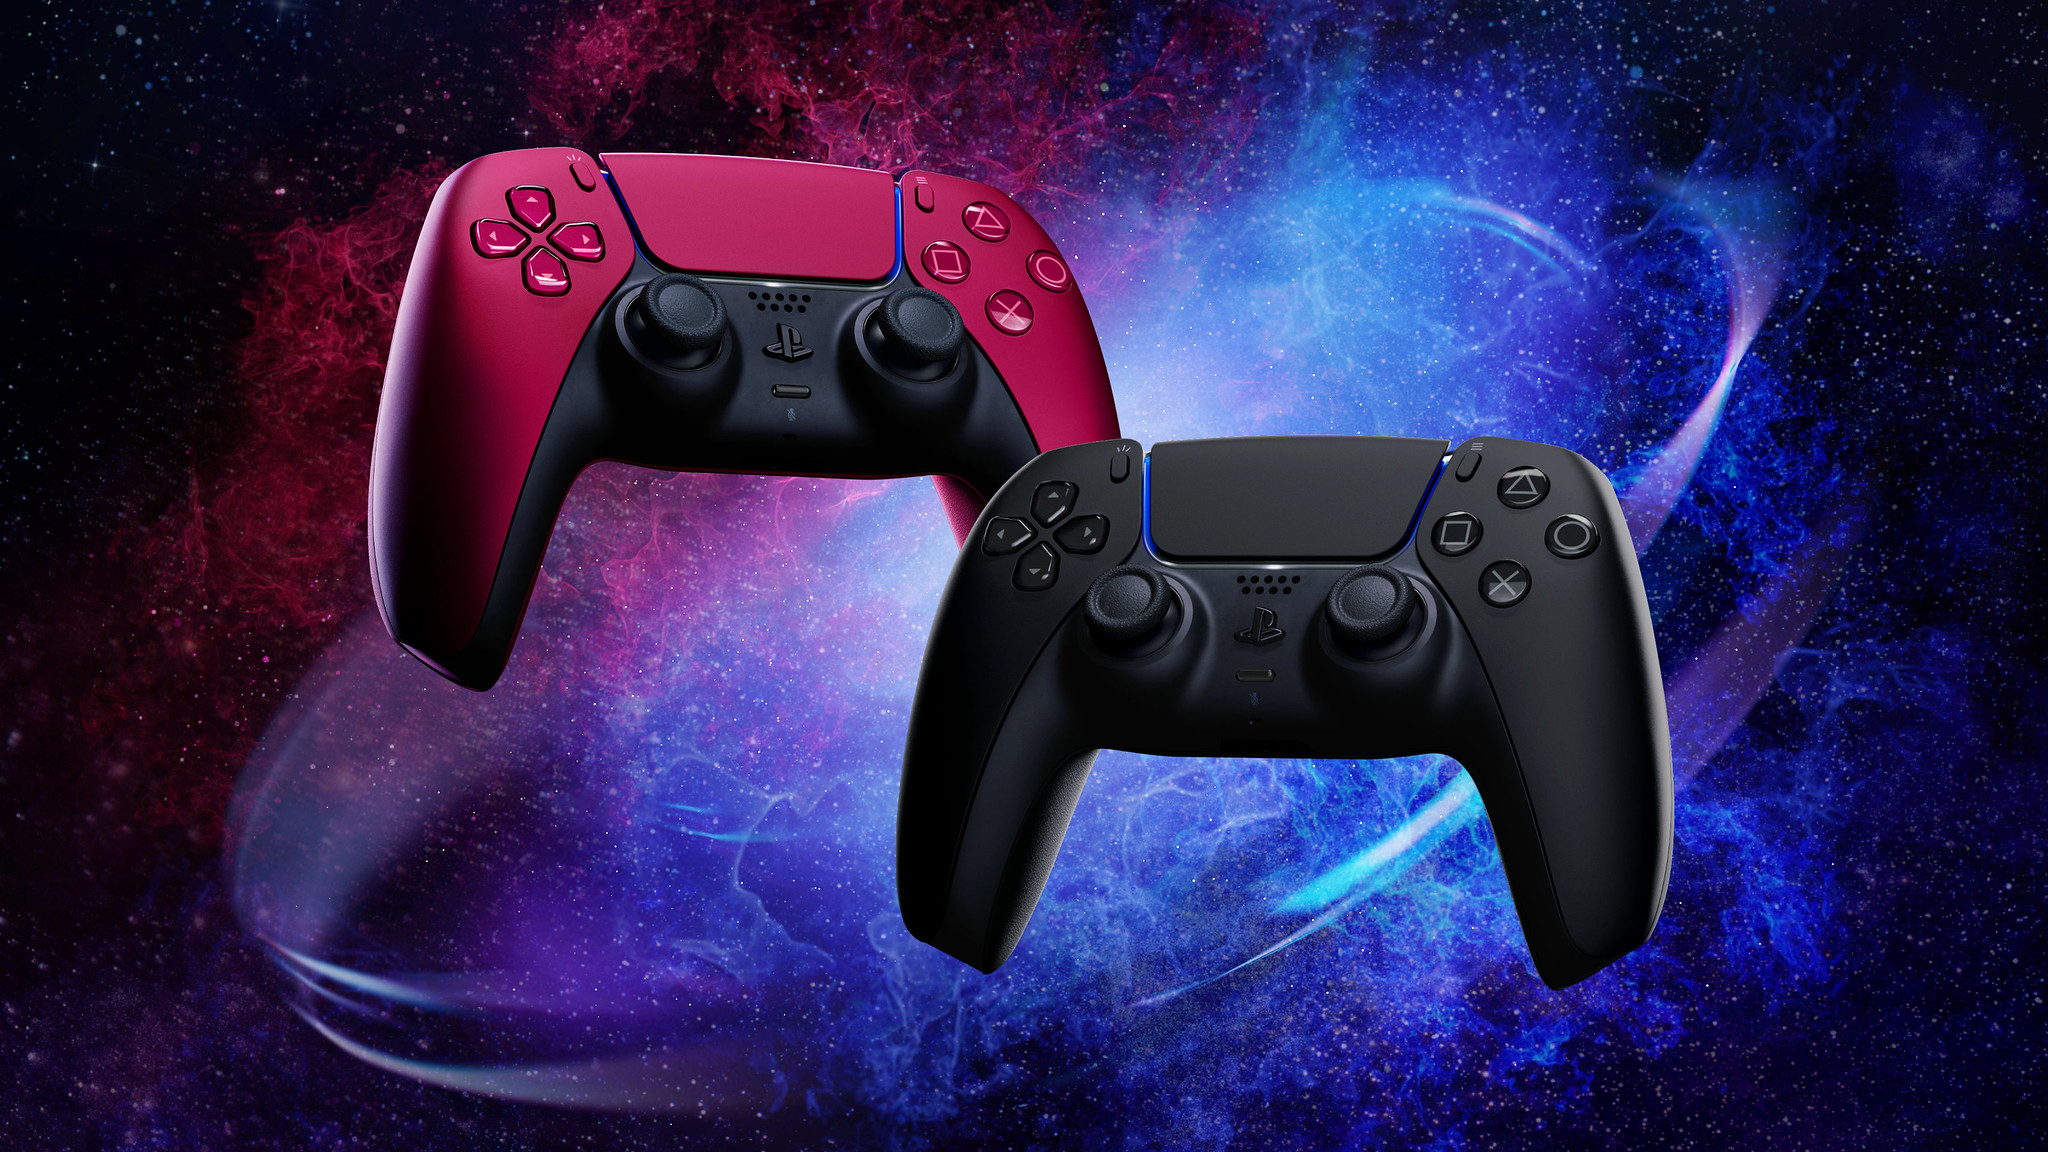 2048x1152 2 Playstation 5 controller in space